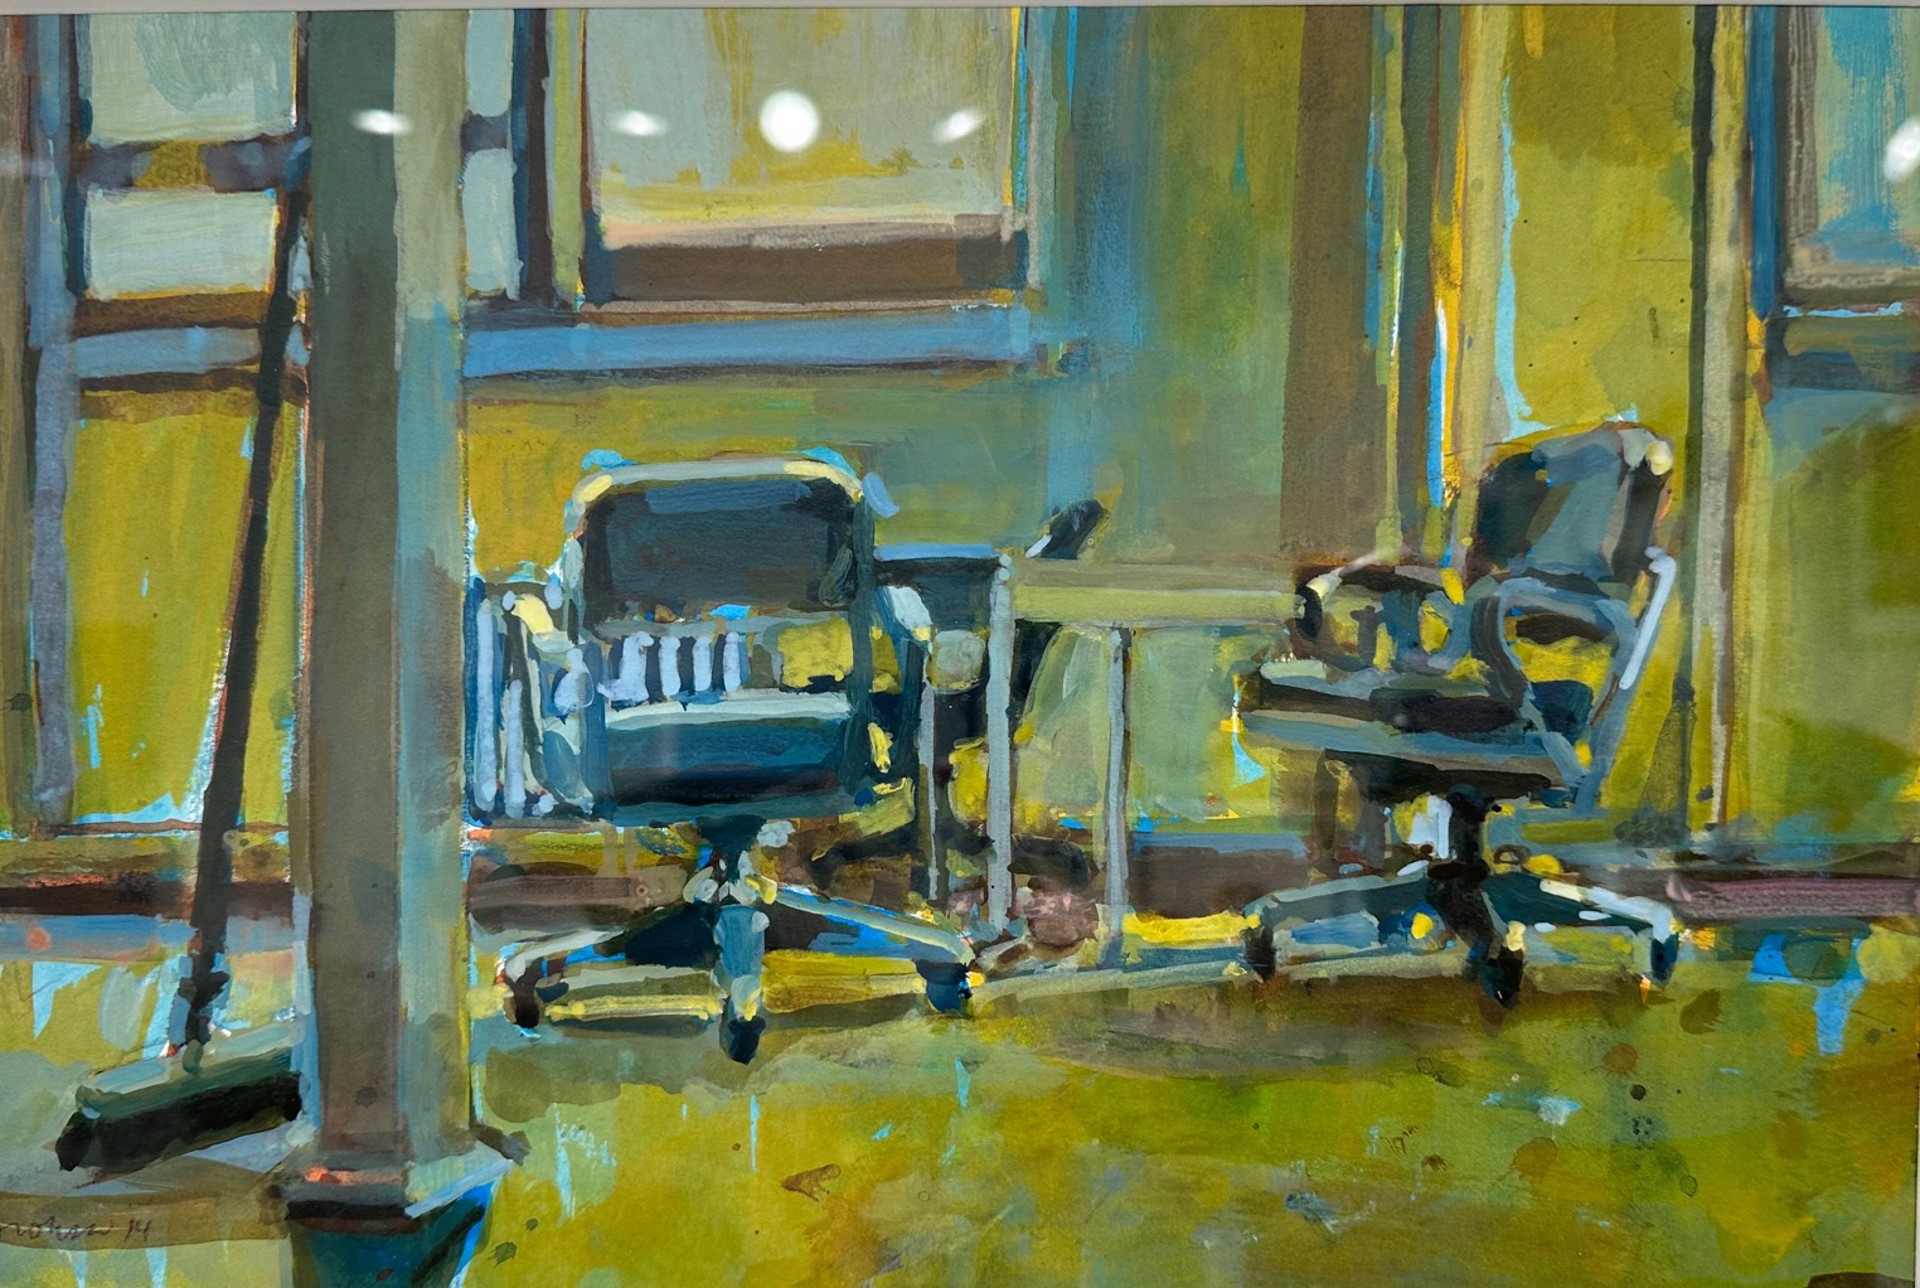 Noonan Chairs: Warm by Kim Frohsin